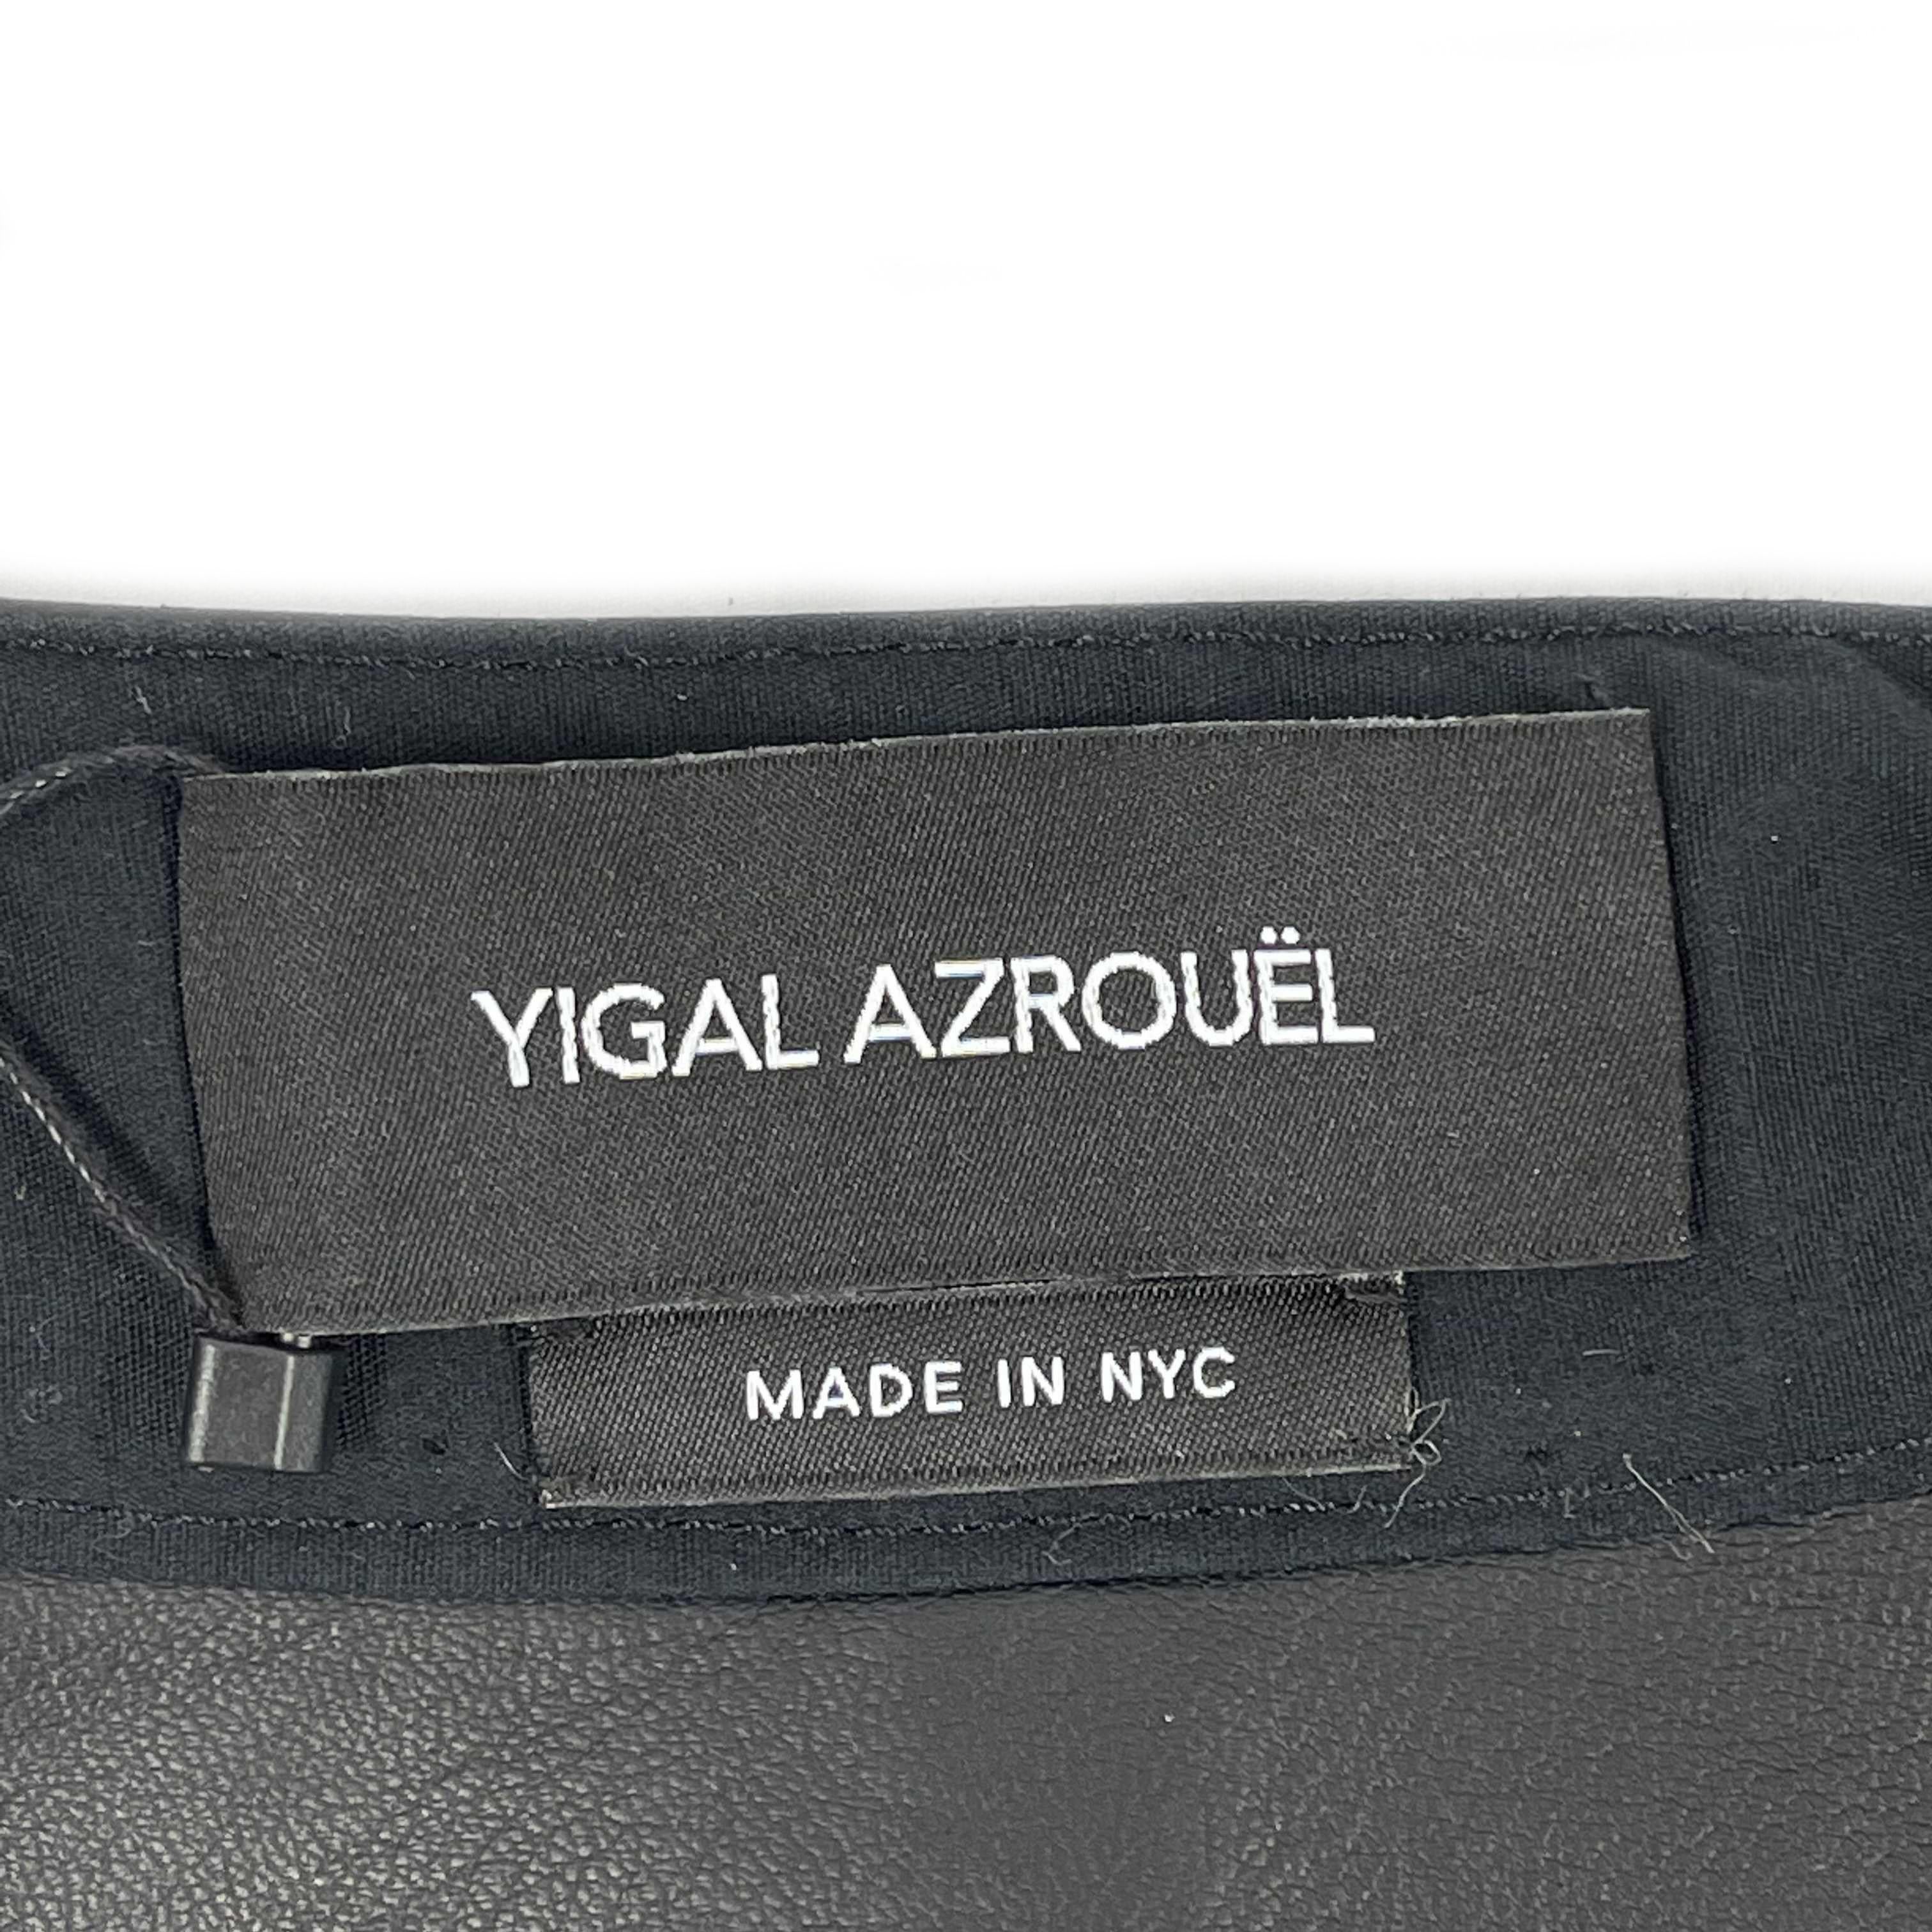 Yigal Azrouël Sheer Embroidered Black Leather Moto Jacket 2 / XS 2